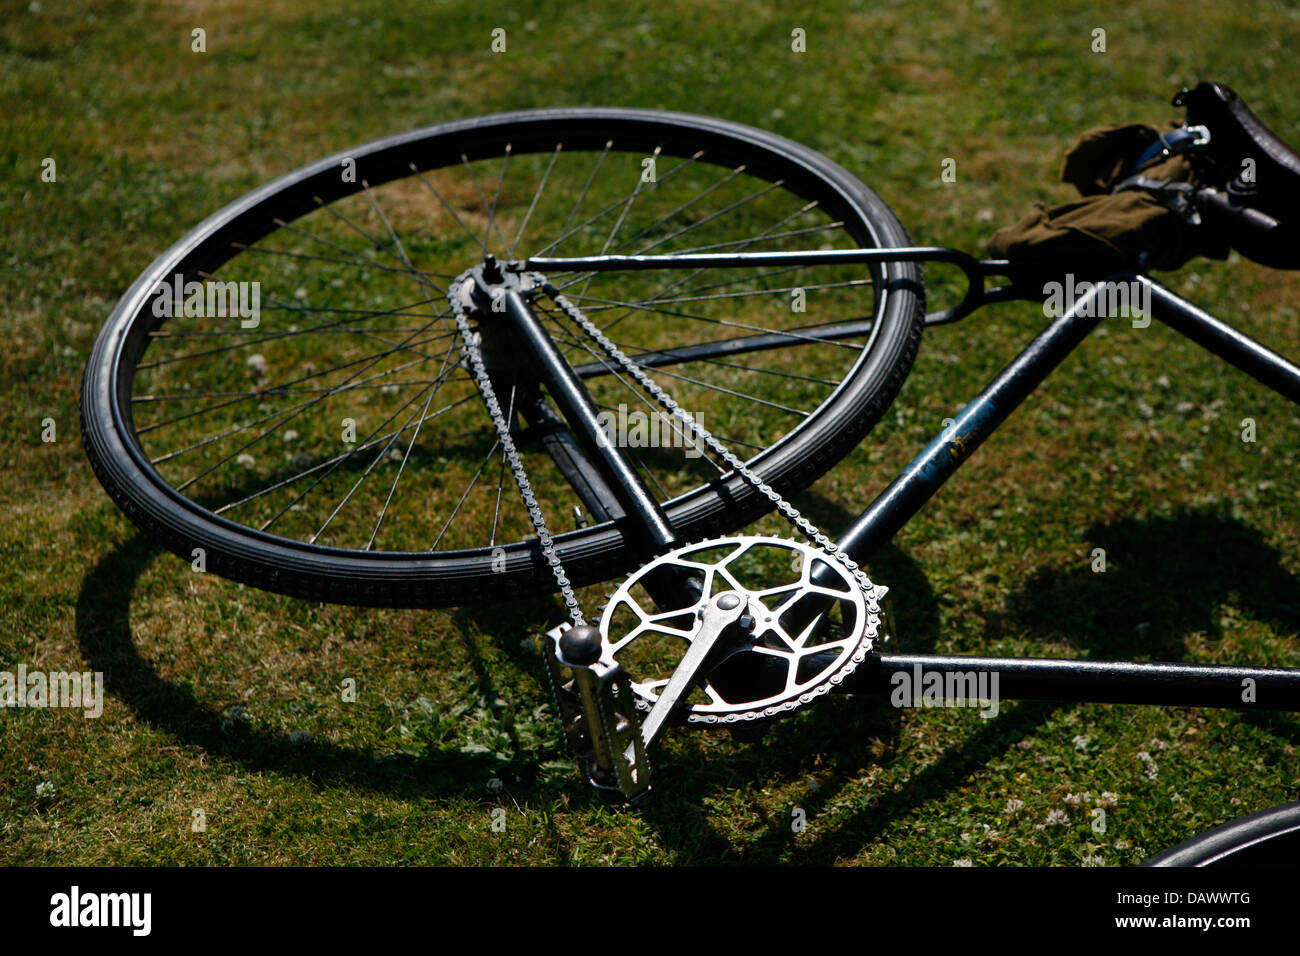 Vintage bicycle on its side showing crank wheel, chain and back wheel. Stock Photo